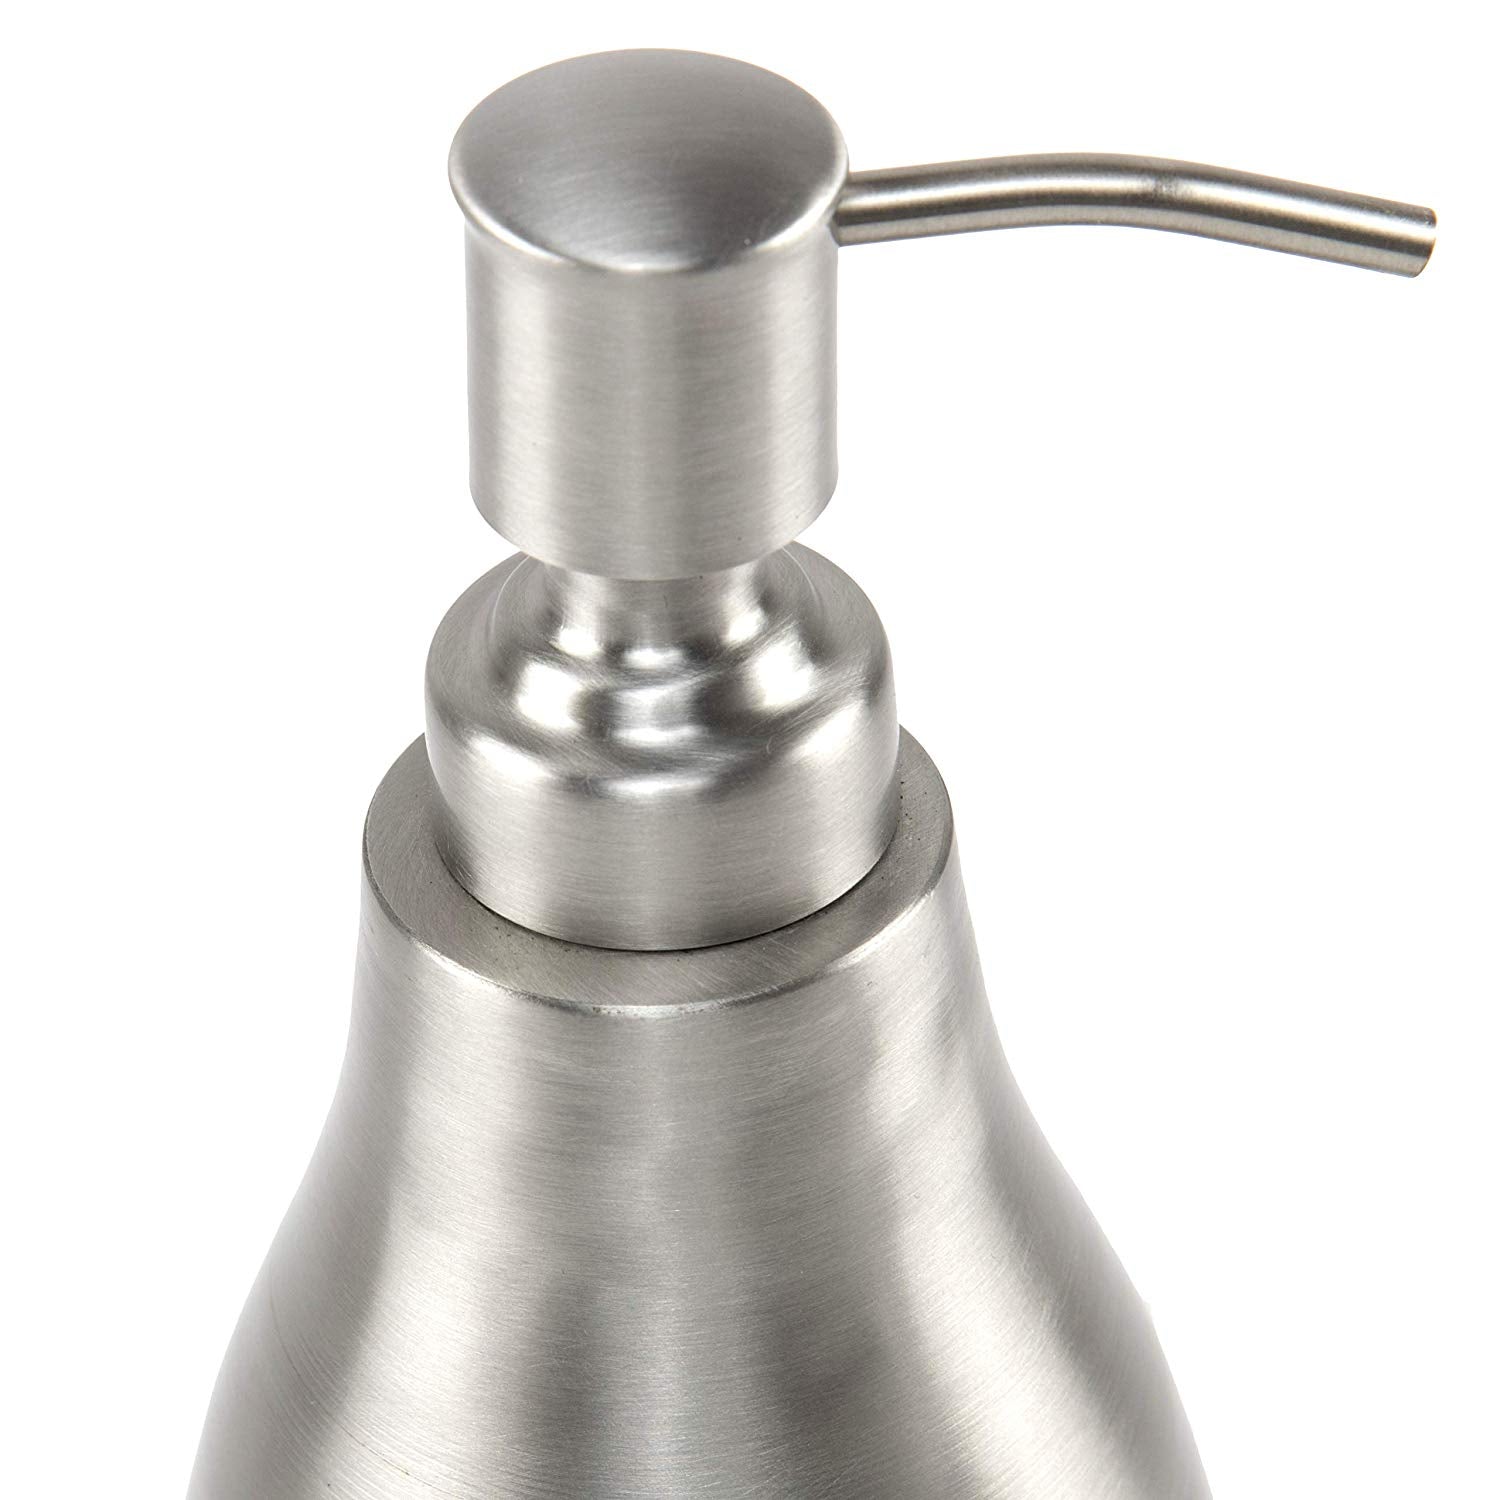 SWHF High Grade Stainless Steel Soap Dispenser- Crop - SWHF